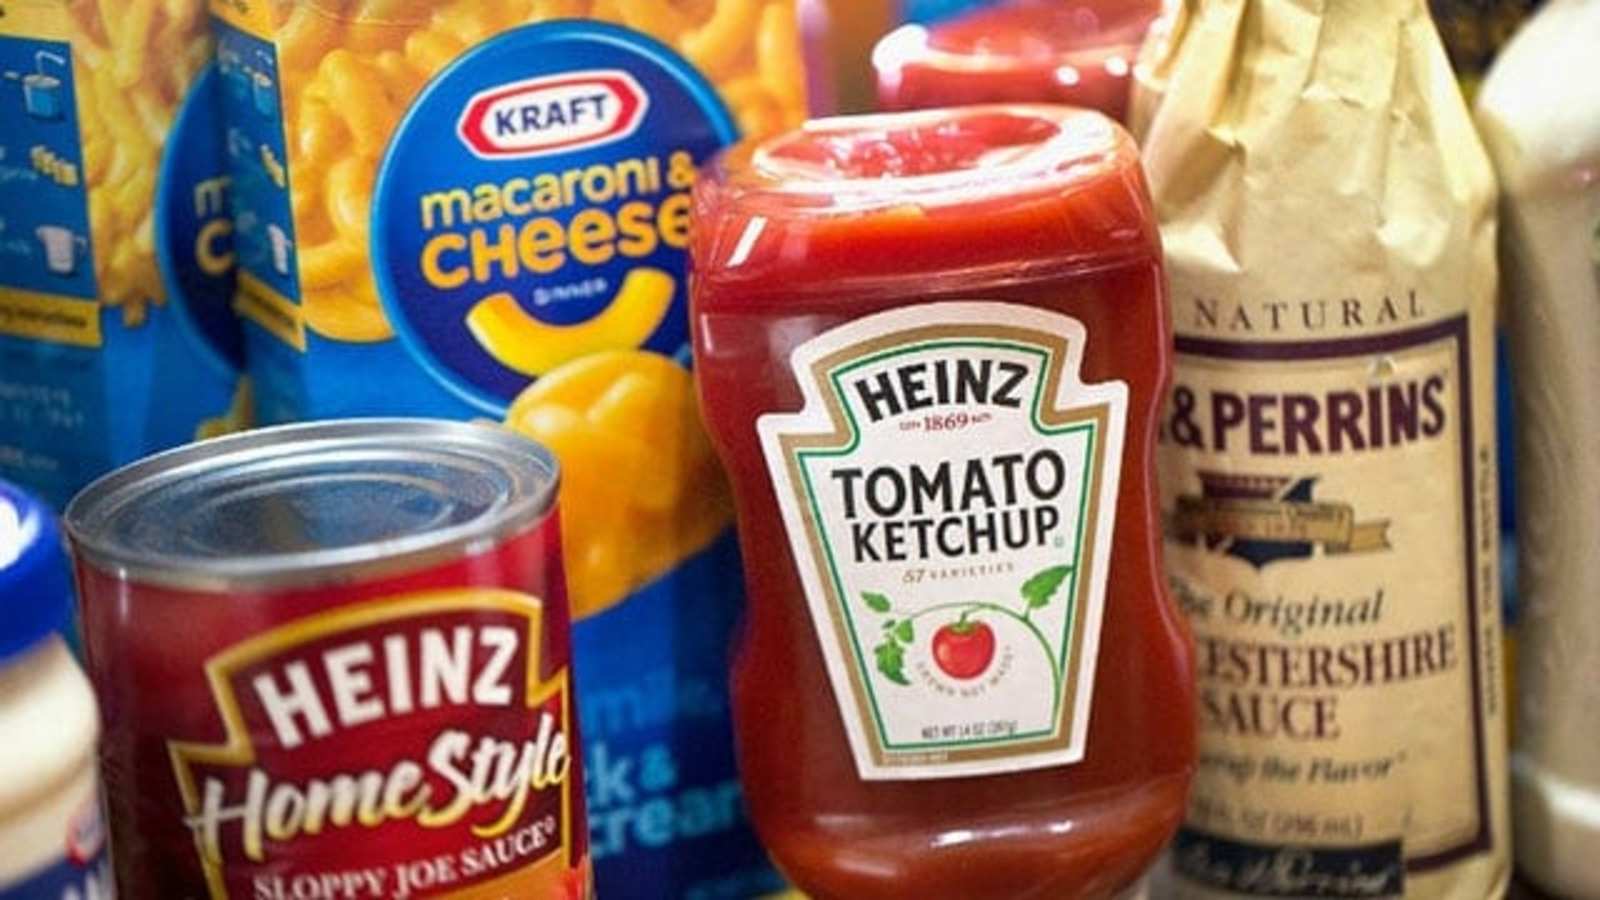 Kraft Heinz, Keurig Dr Pepper report strong Q1 results buoyed by extended at home consumption